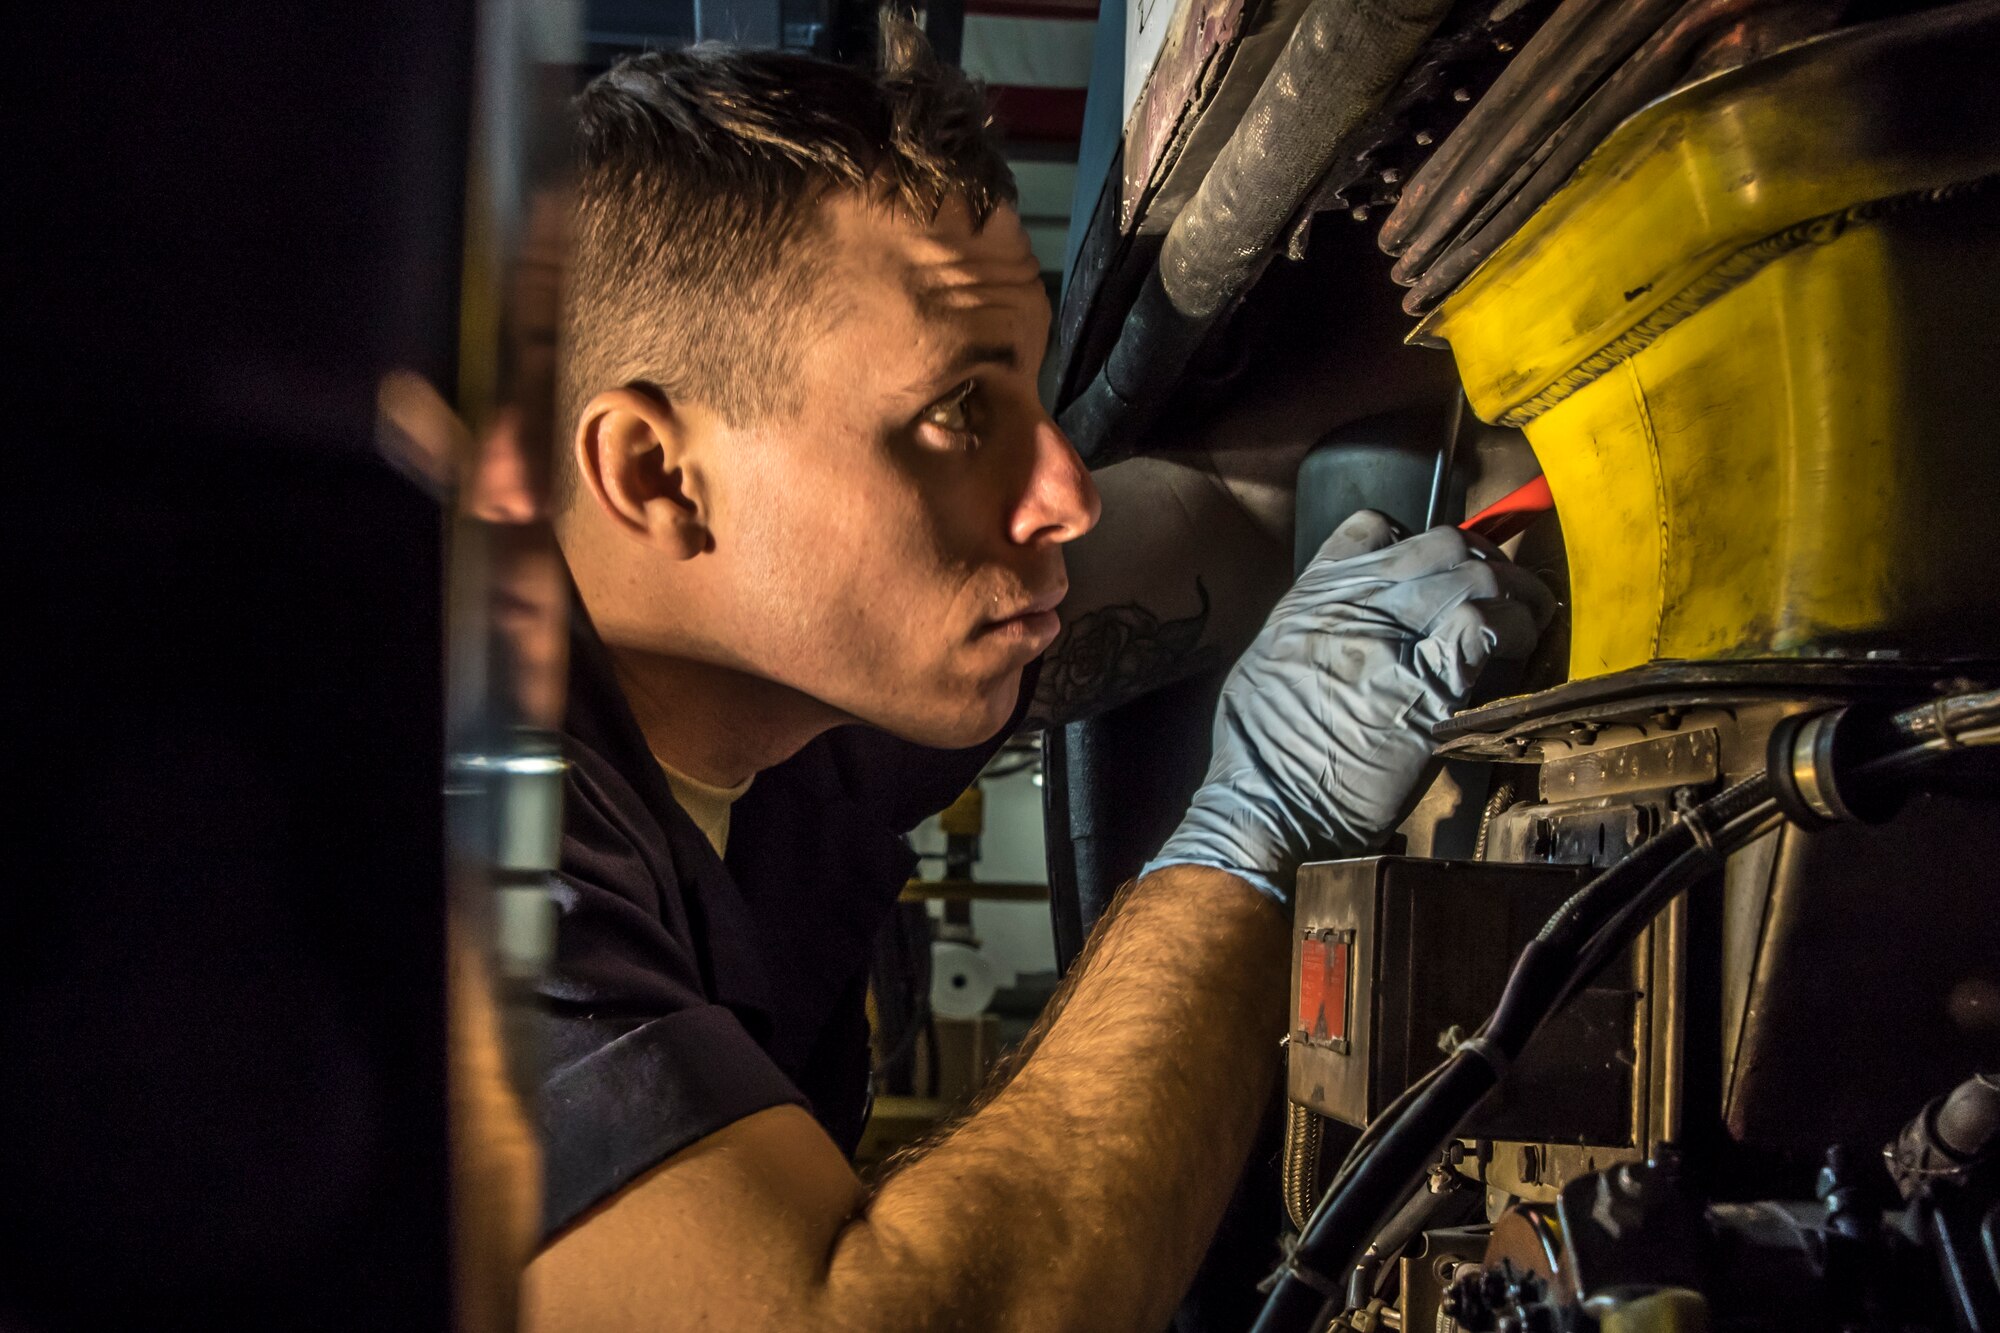 A photo of a military member working an a C-130 aircraft.